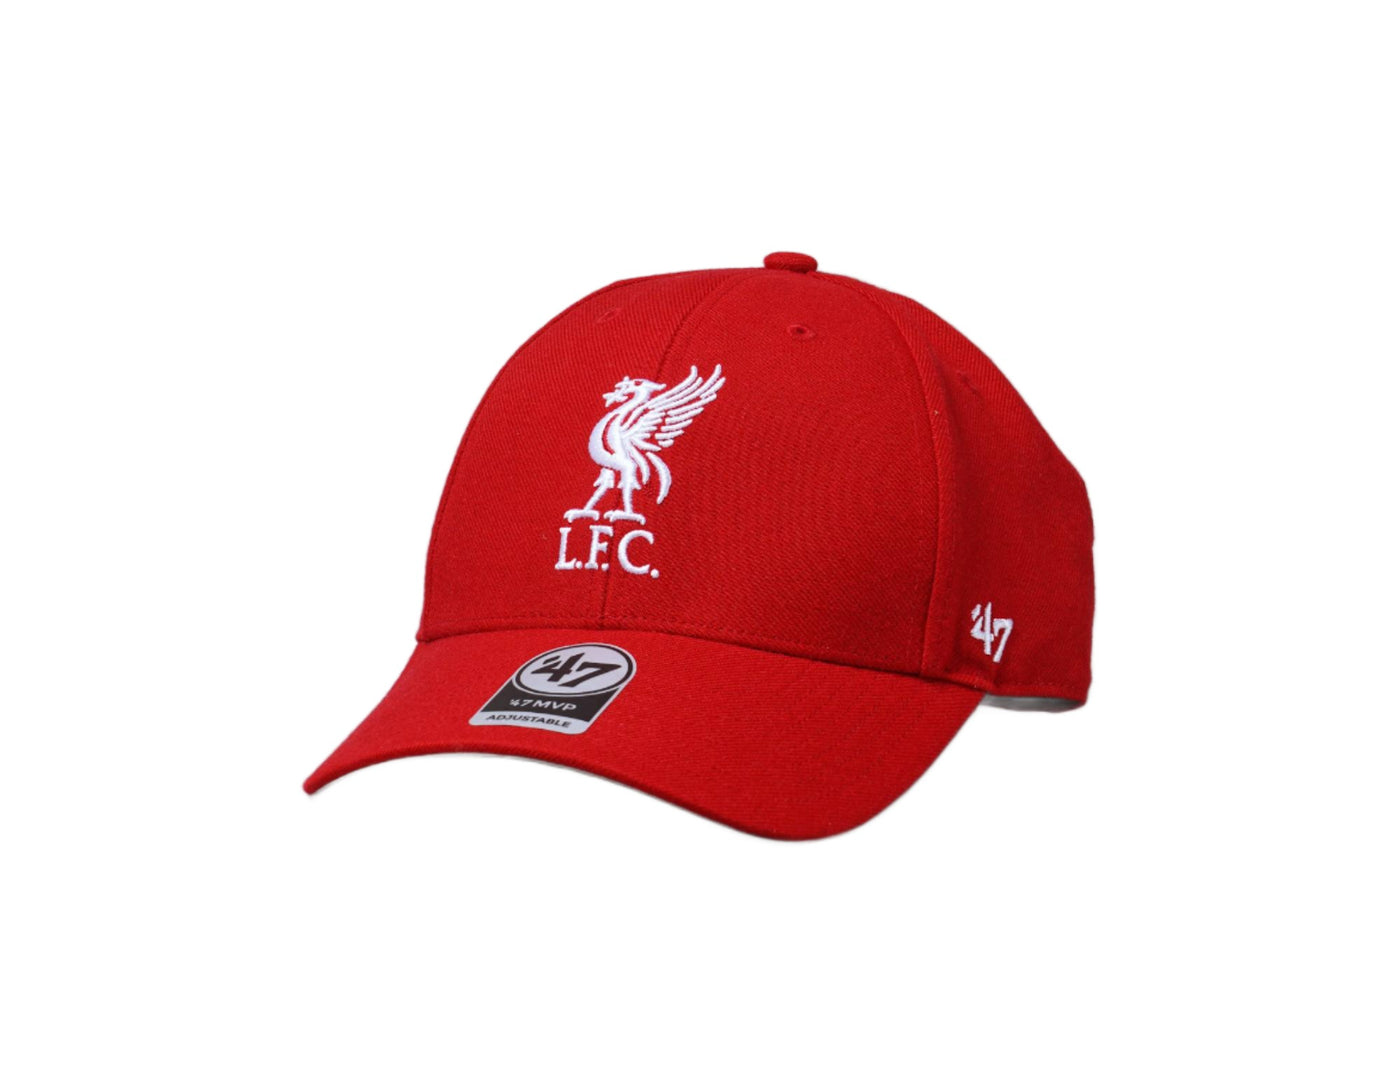 Cap Adjustable 47 MVP Liverpool FC Red/White 47 Adjustable Cap / Red / One Size